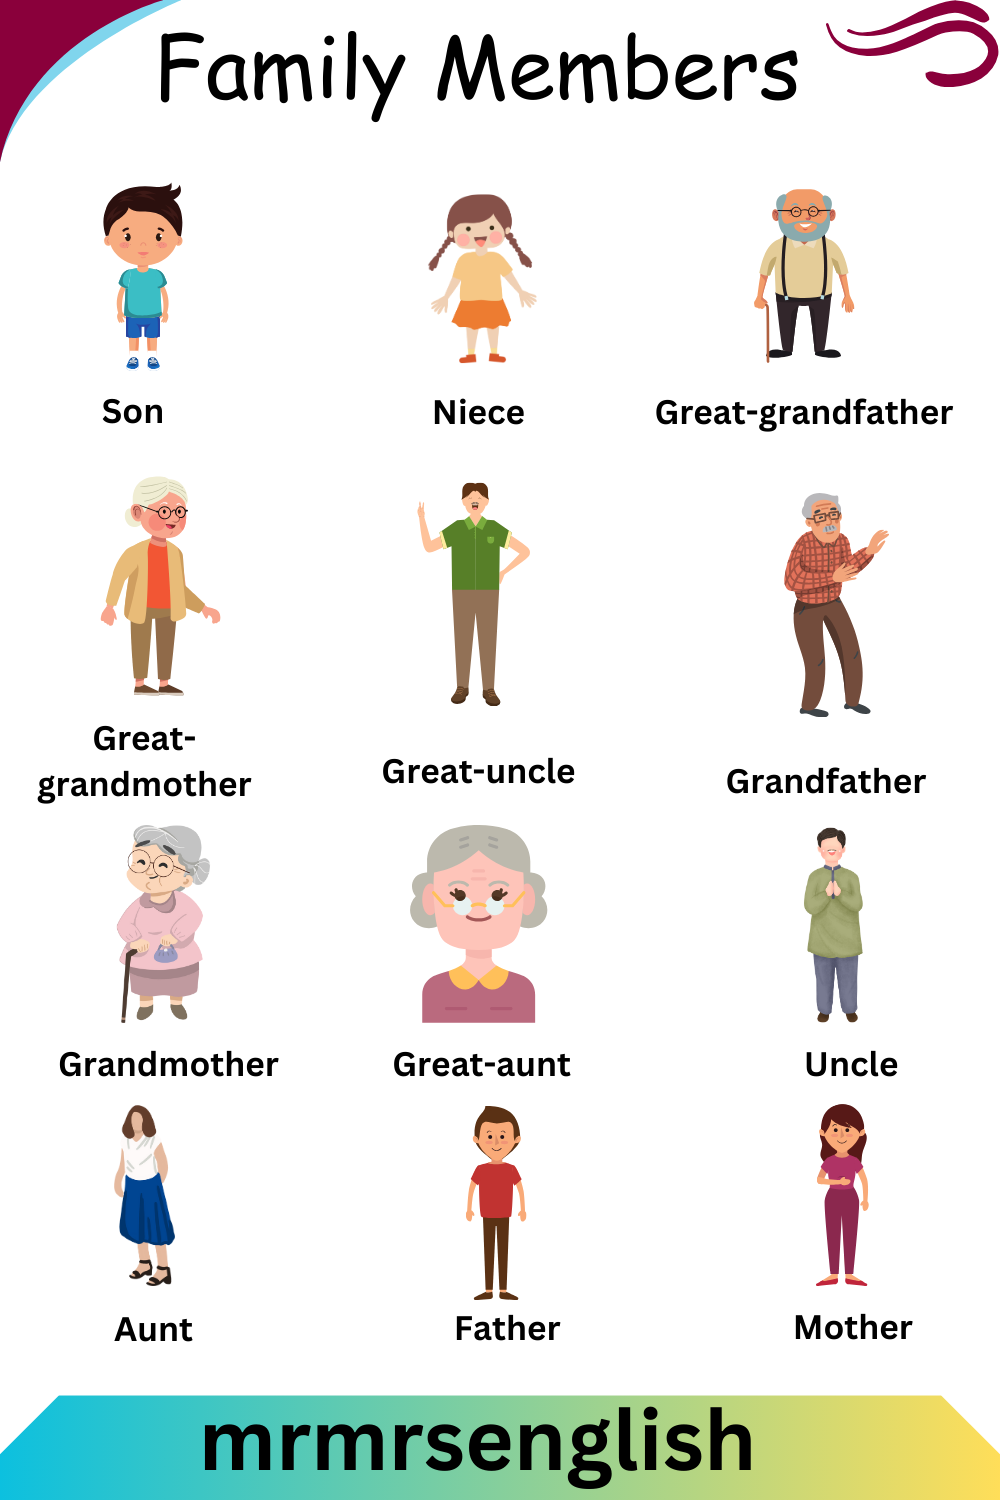 Members of family names in English